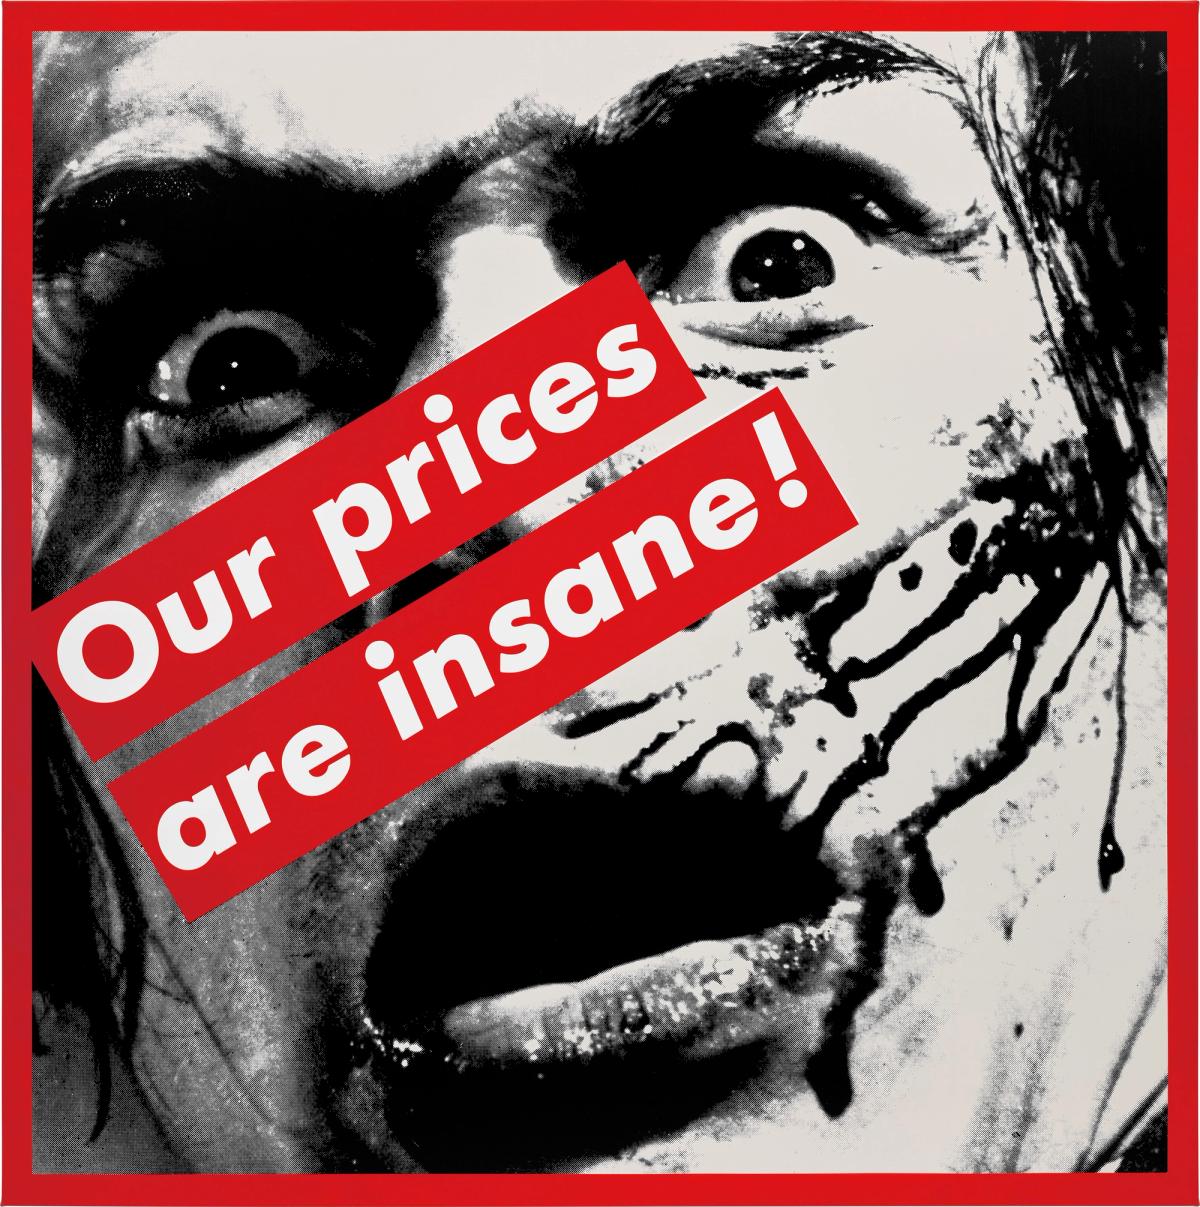 Barbara Kruger, Untitled (Our prices are insane!), 1987 Courtesy of Phillips